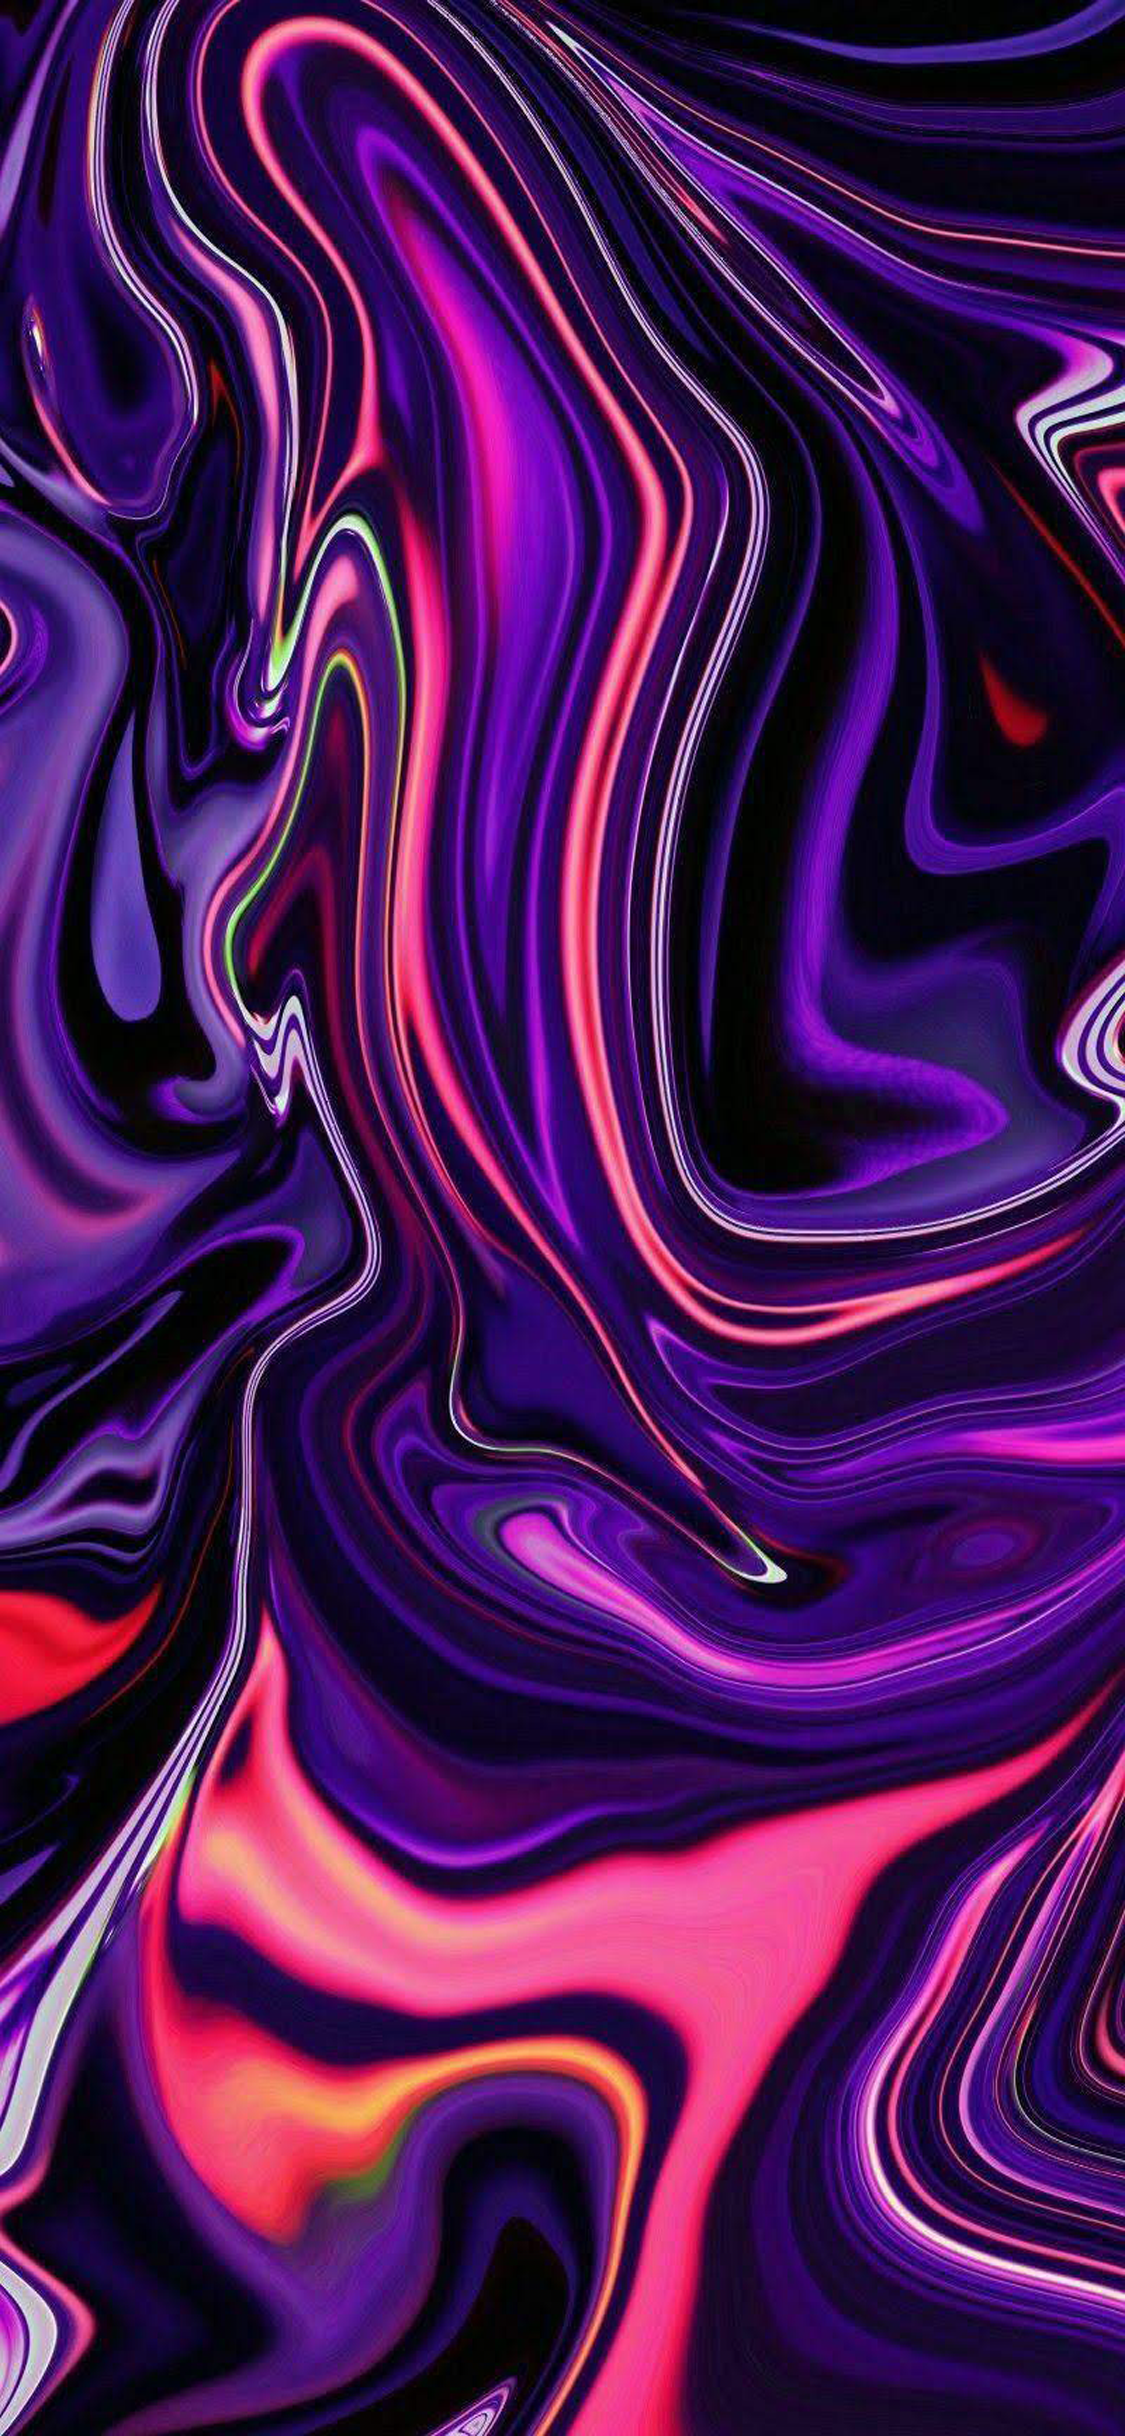 20+ Aesthetic Abstract Wallpapers for iPhone 11